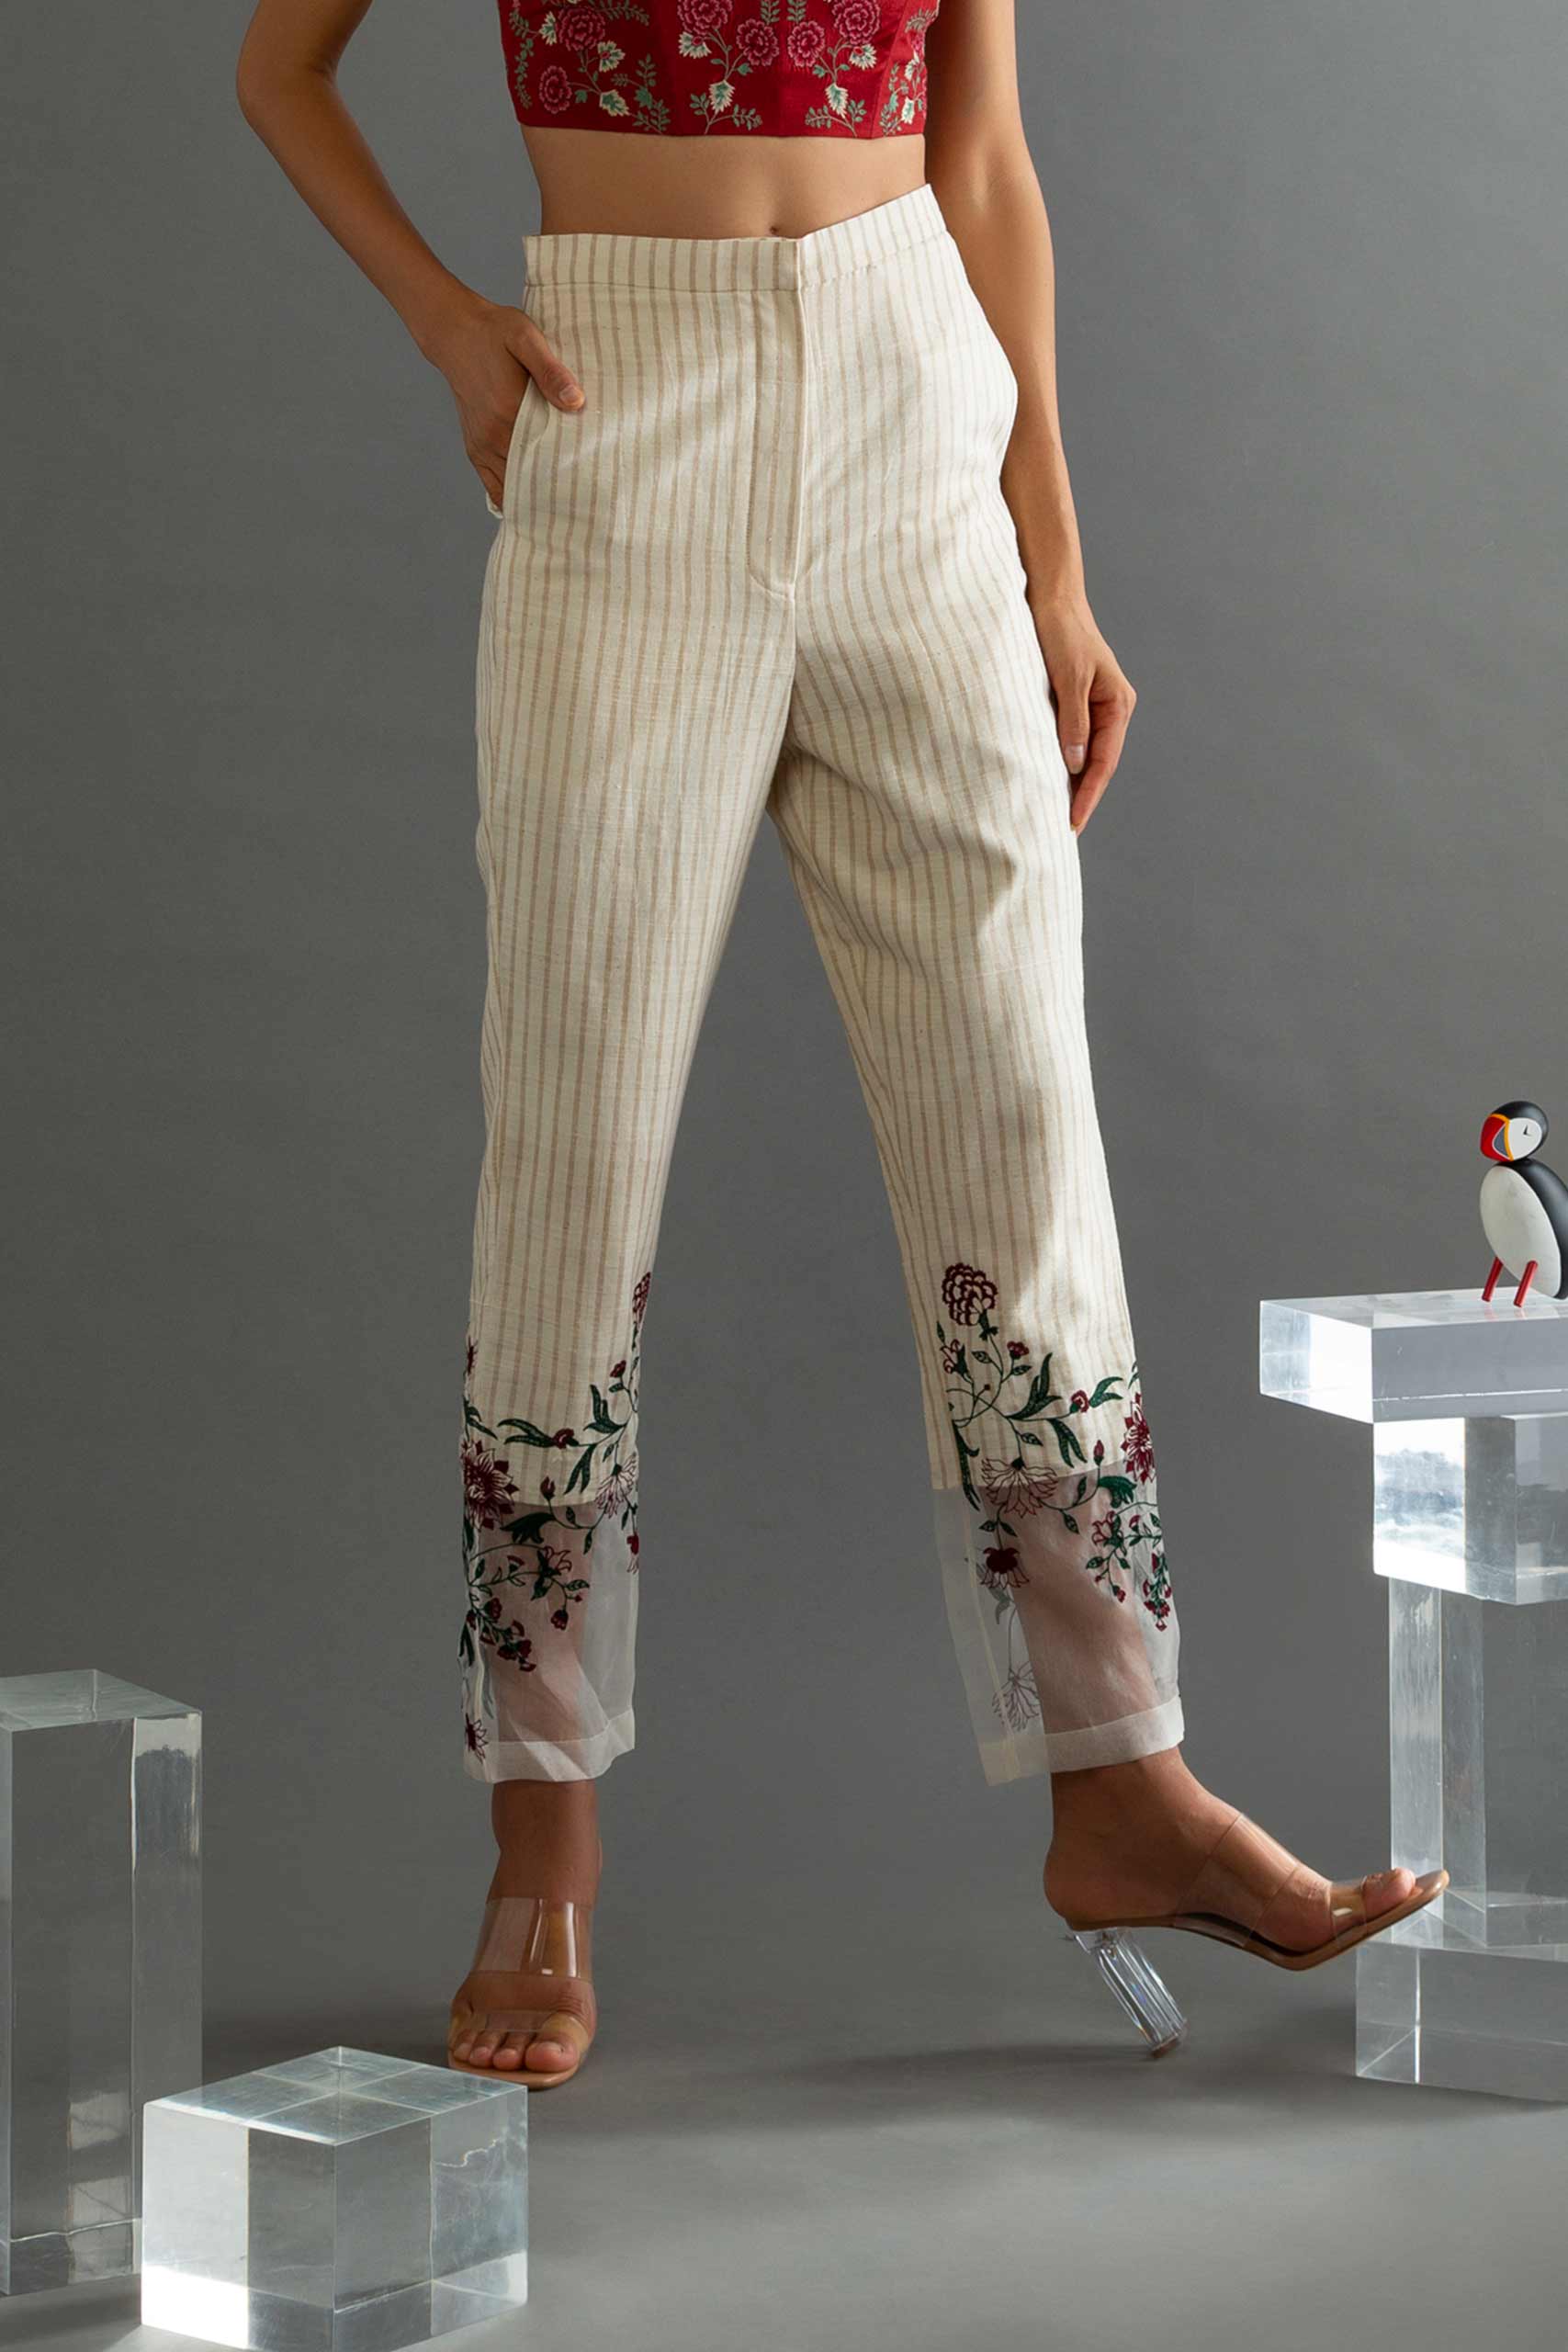 Begonia Hue - Beige Striped Handwoven Cotton Pants